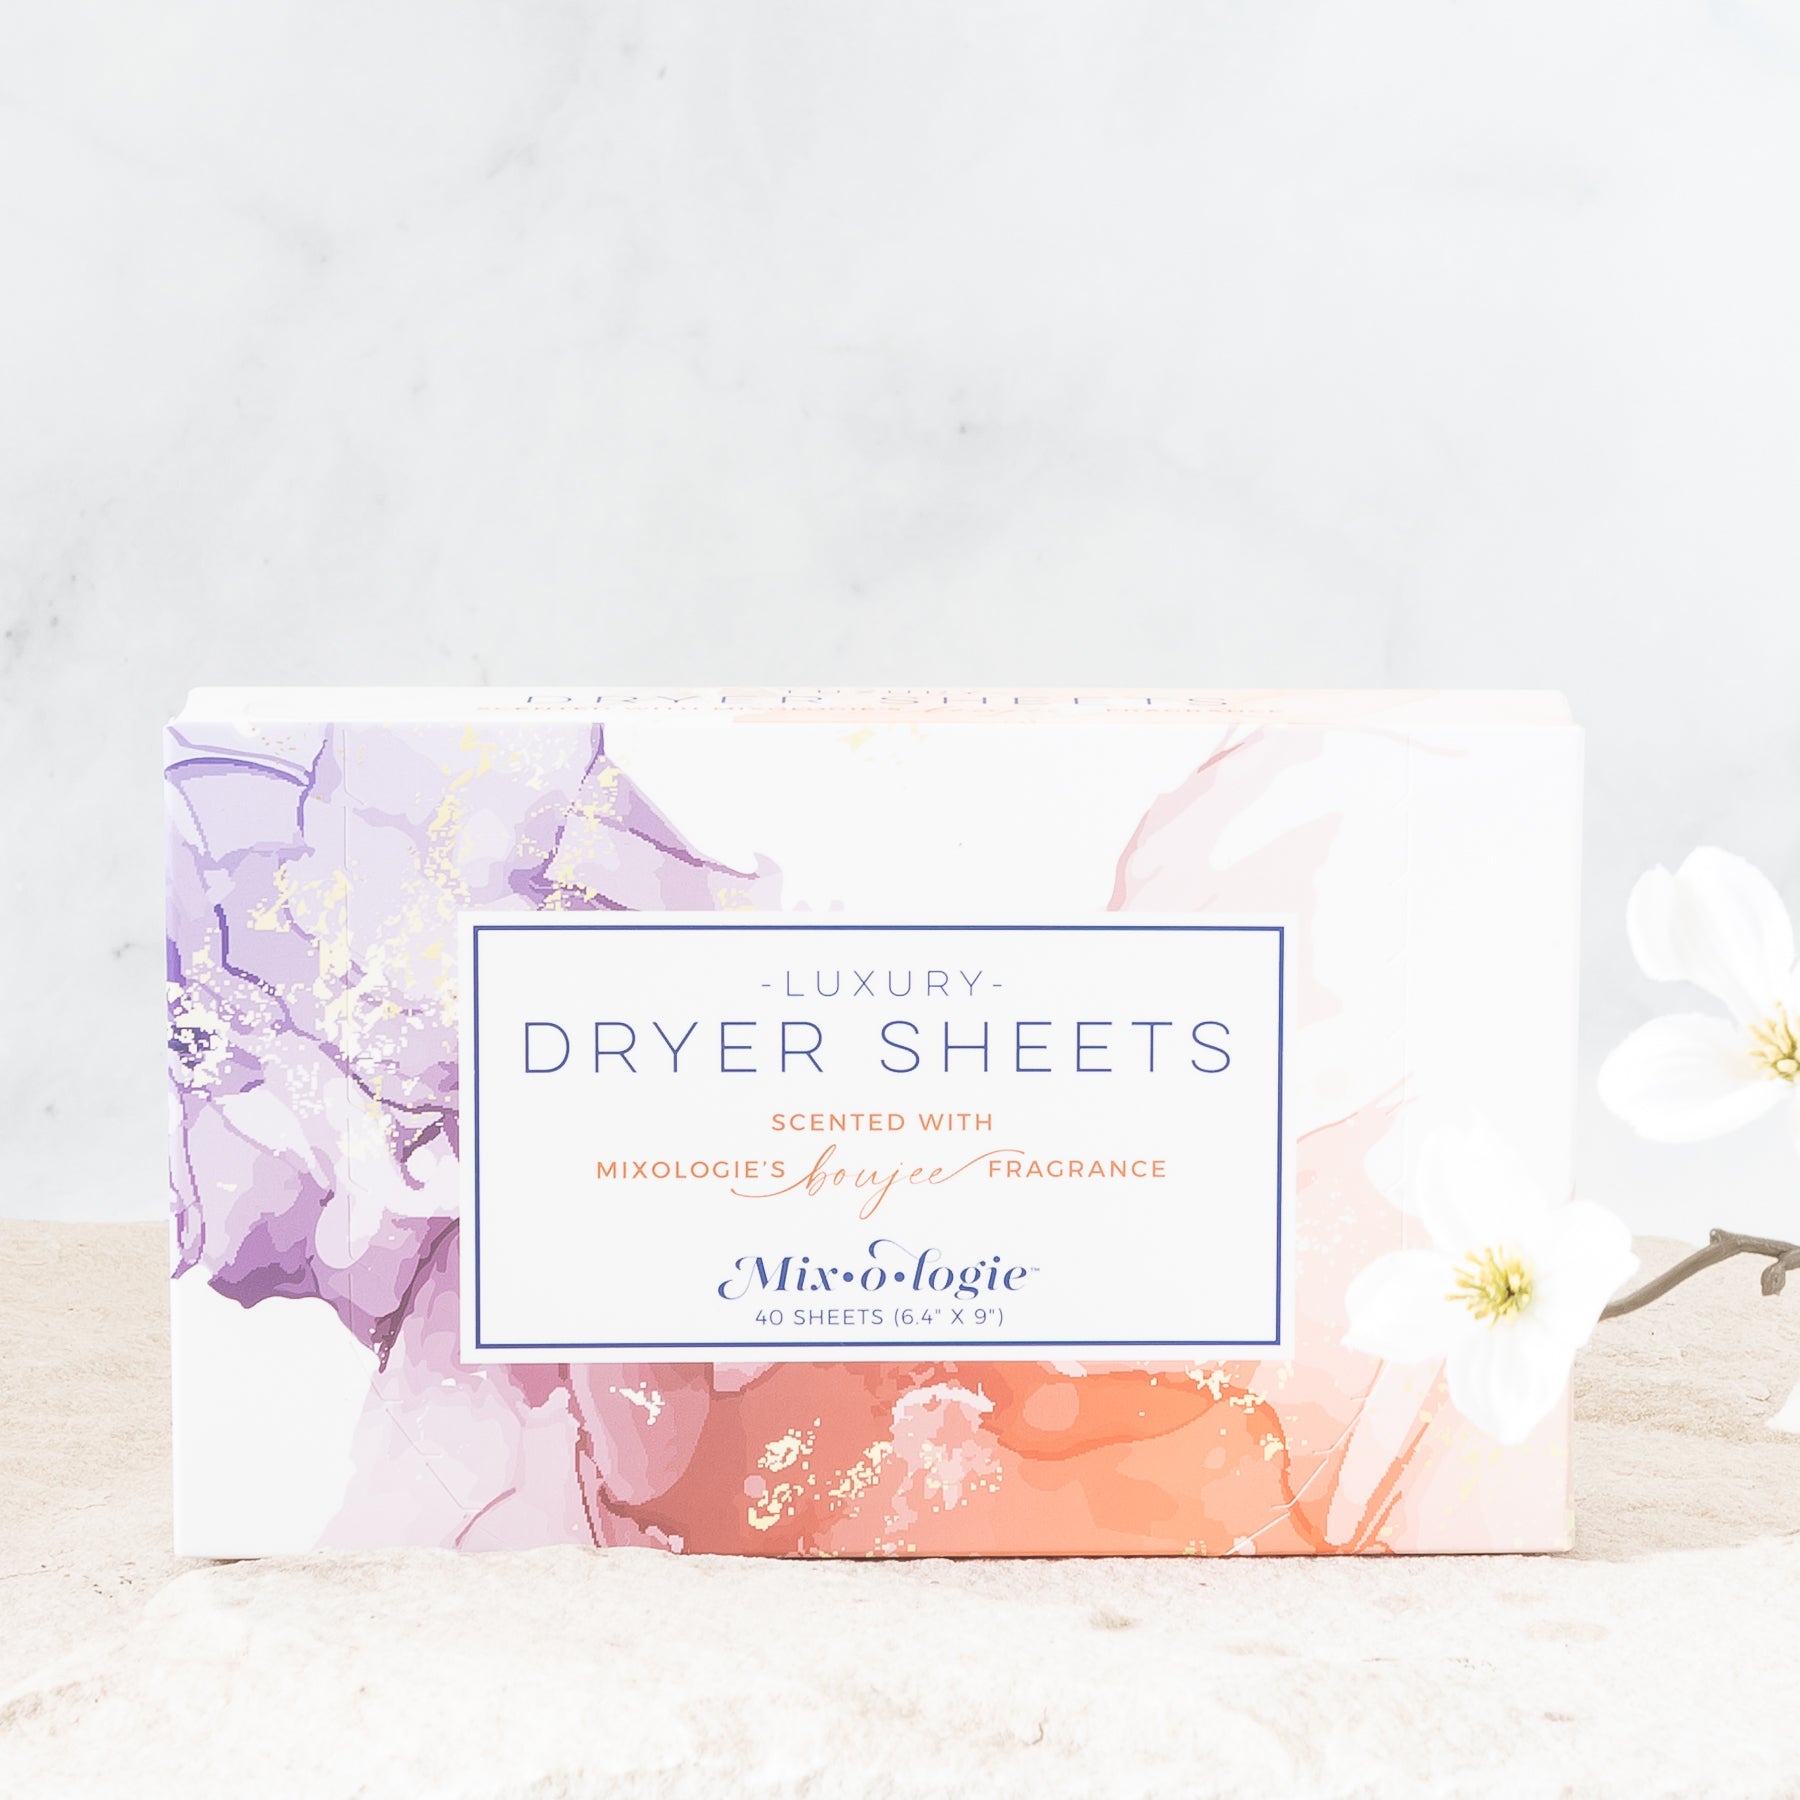 Luxury dryer sheets scented with Mixologie's Boujee fragrance. 40 of the 6.4"X9" sized sheets in rectangle box. 